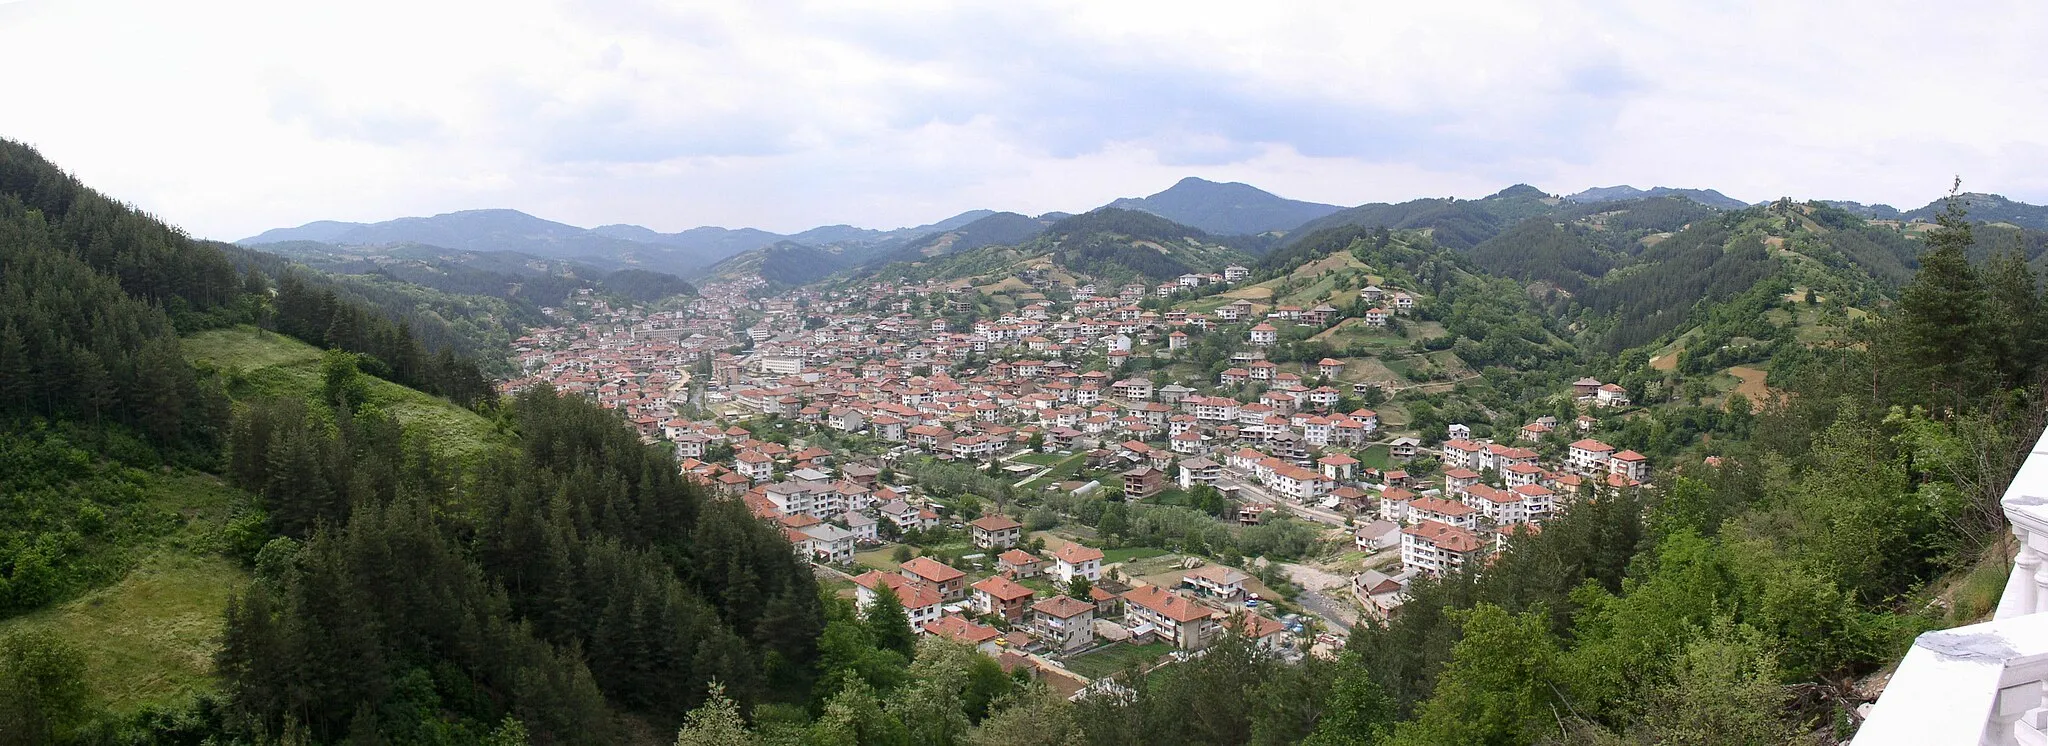 Photo showing: Panoramic view of Nedelino, taken from the hotel above the southern end of town